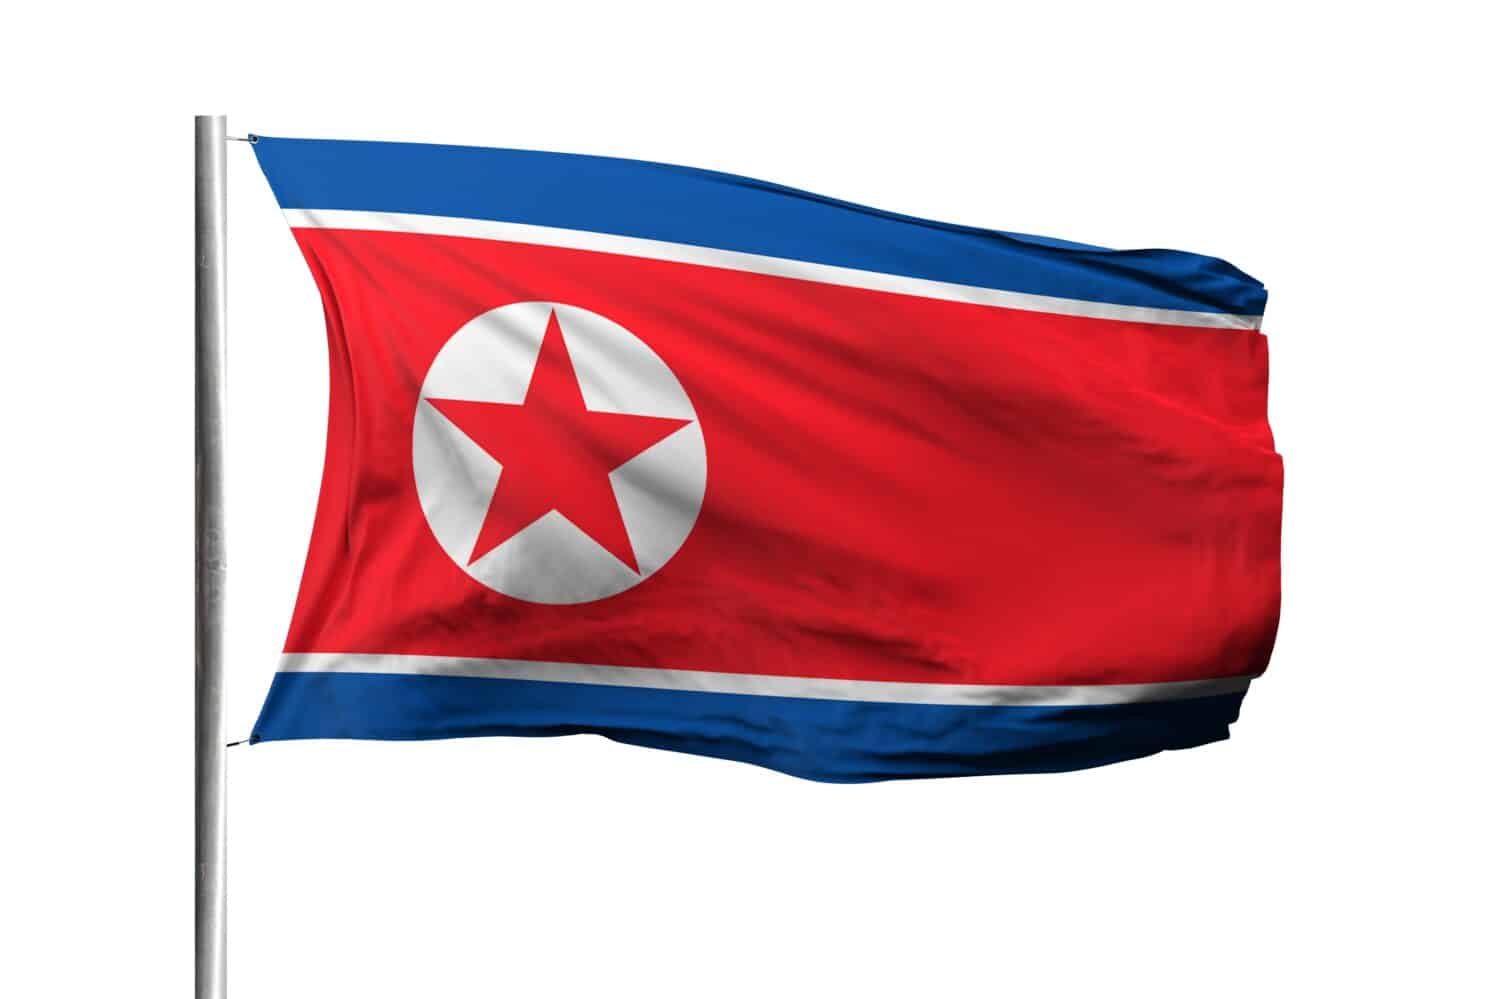 North Korea flag isolated on white background with clipping path. flag symbols of North Korea. flag frame with empty space for your text.